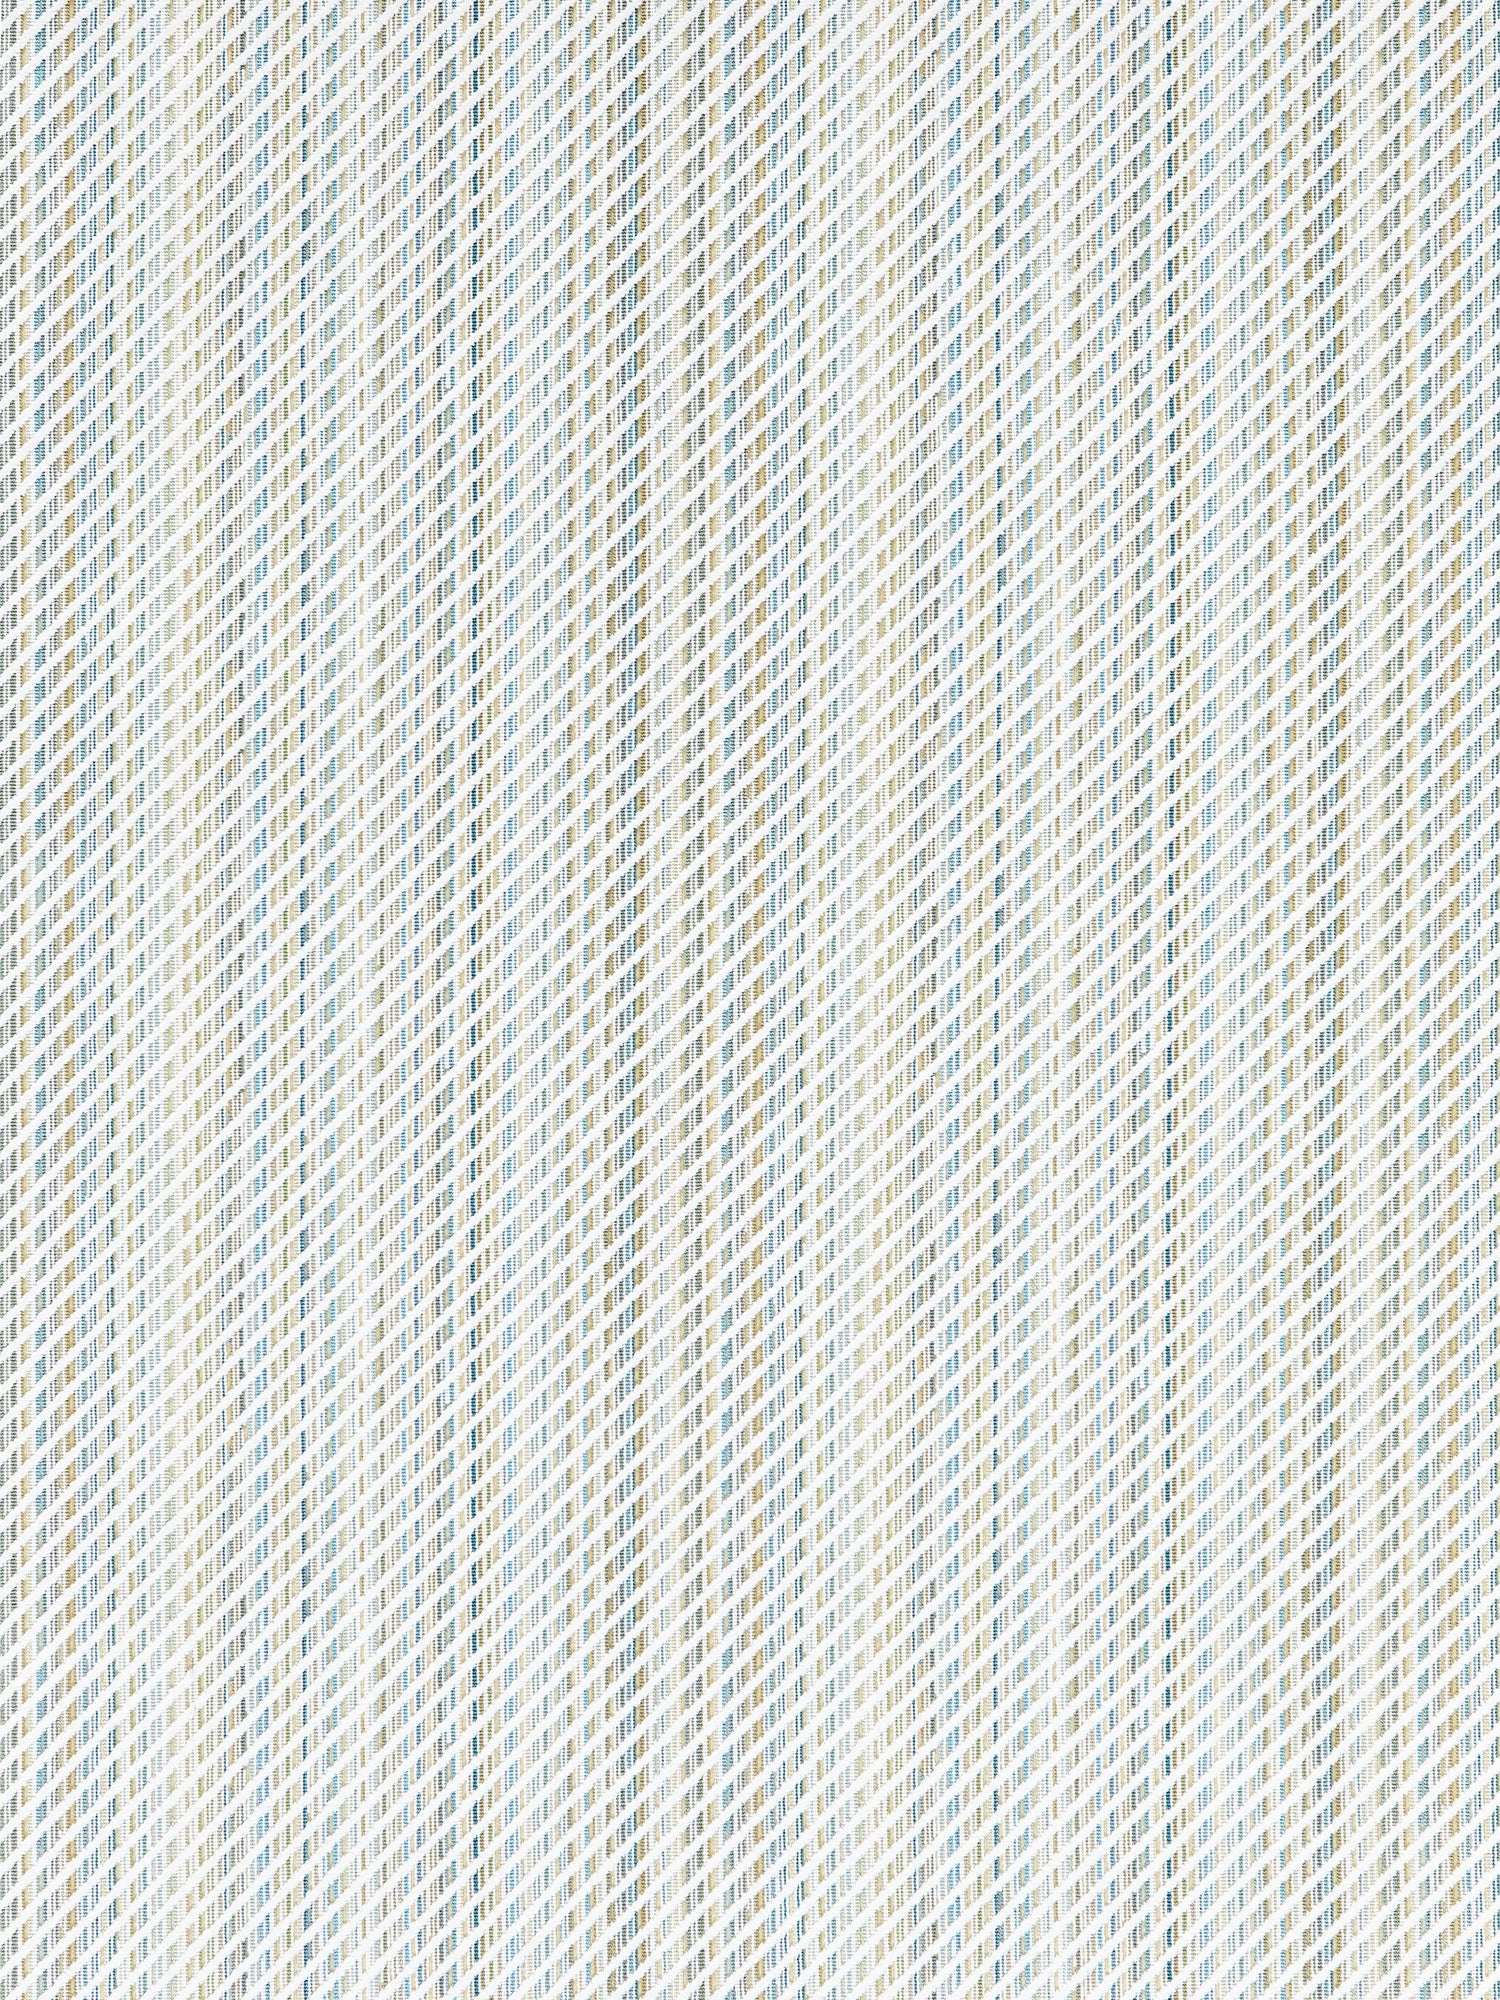 Prisma Velvet fabric in high tide color - pattern number SC 000127238 - by Scalamandre in the Scalamandre Fabrics Book 1 collection